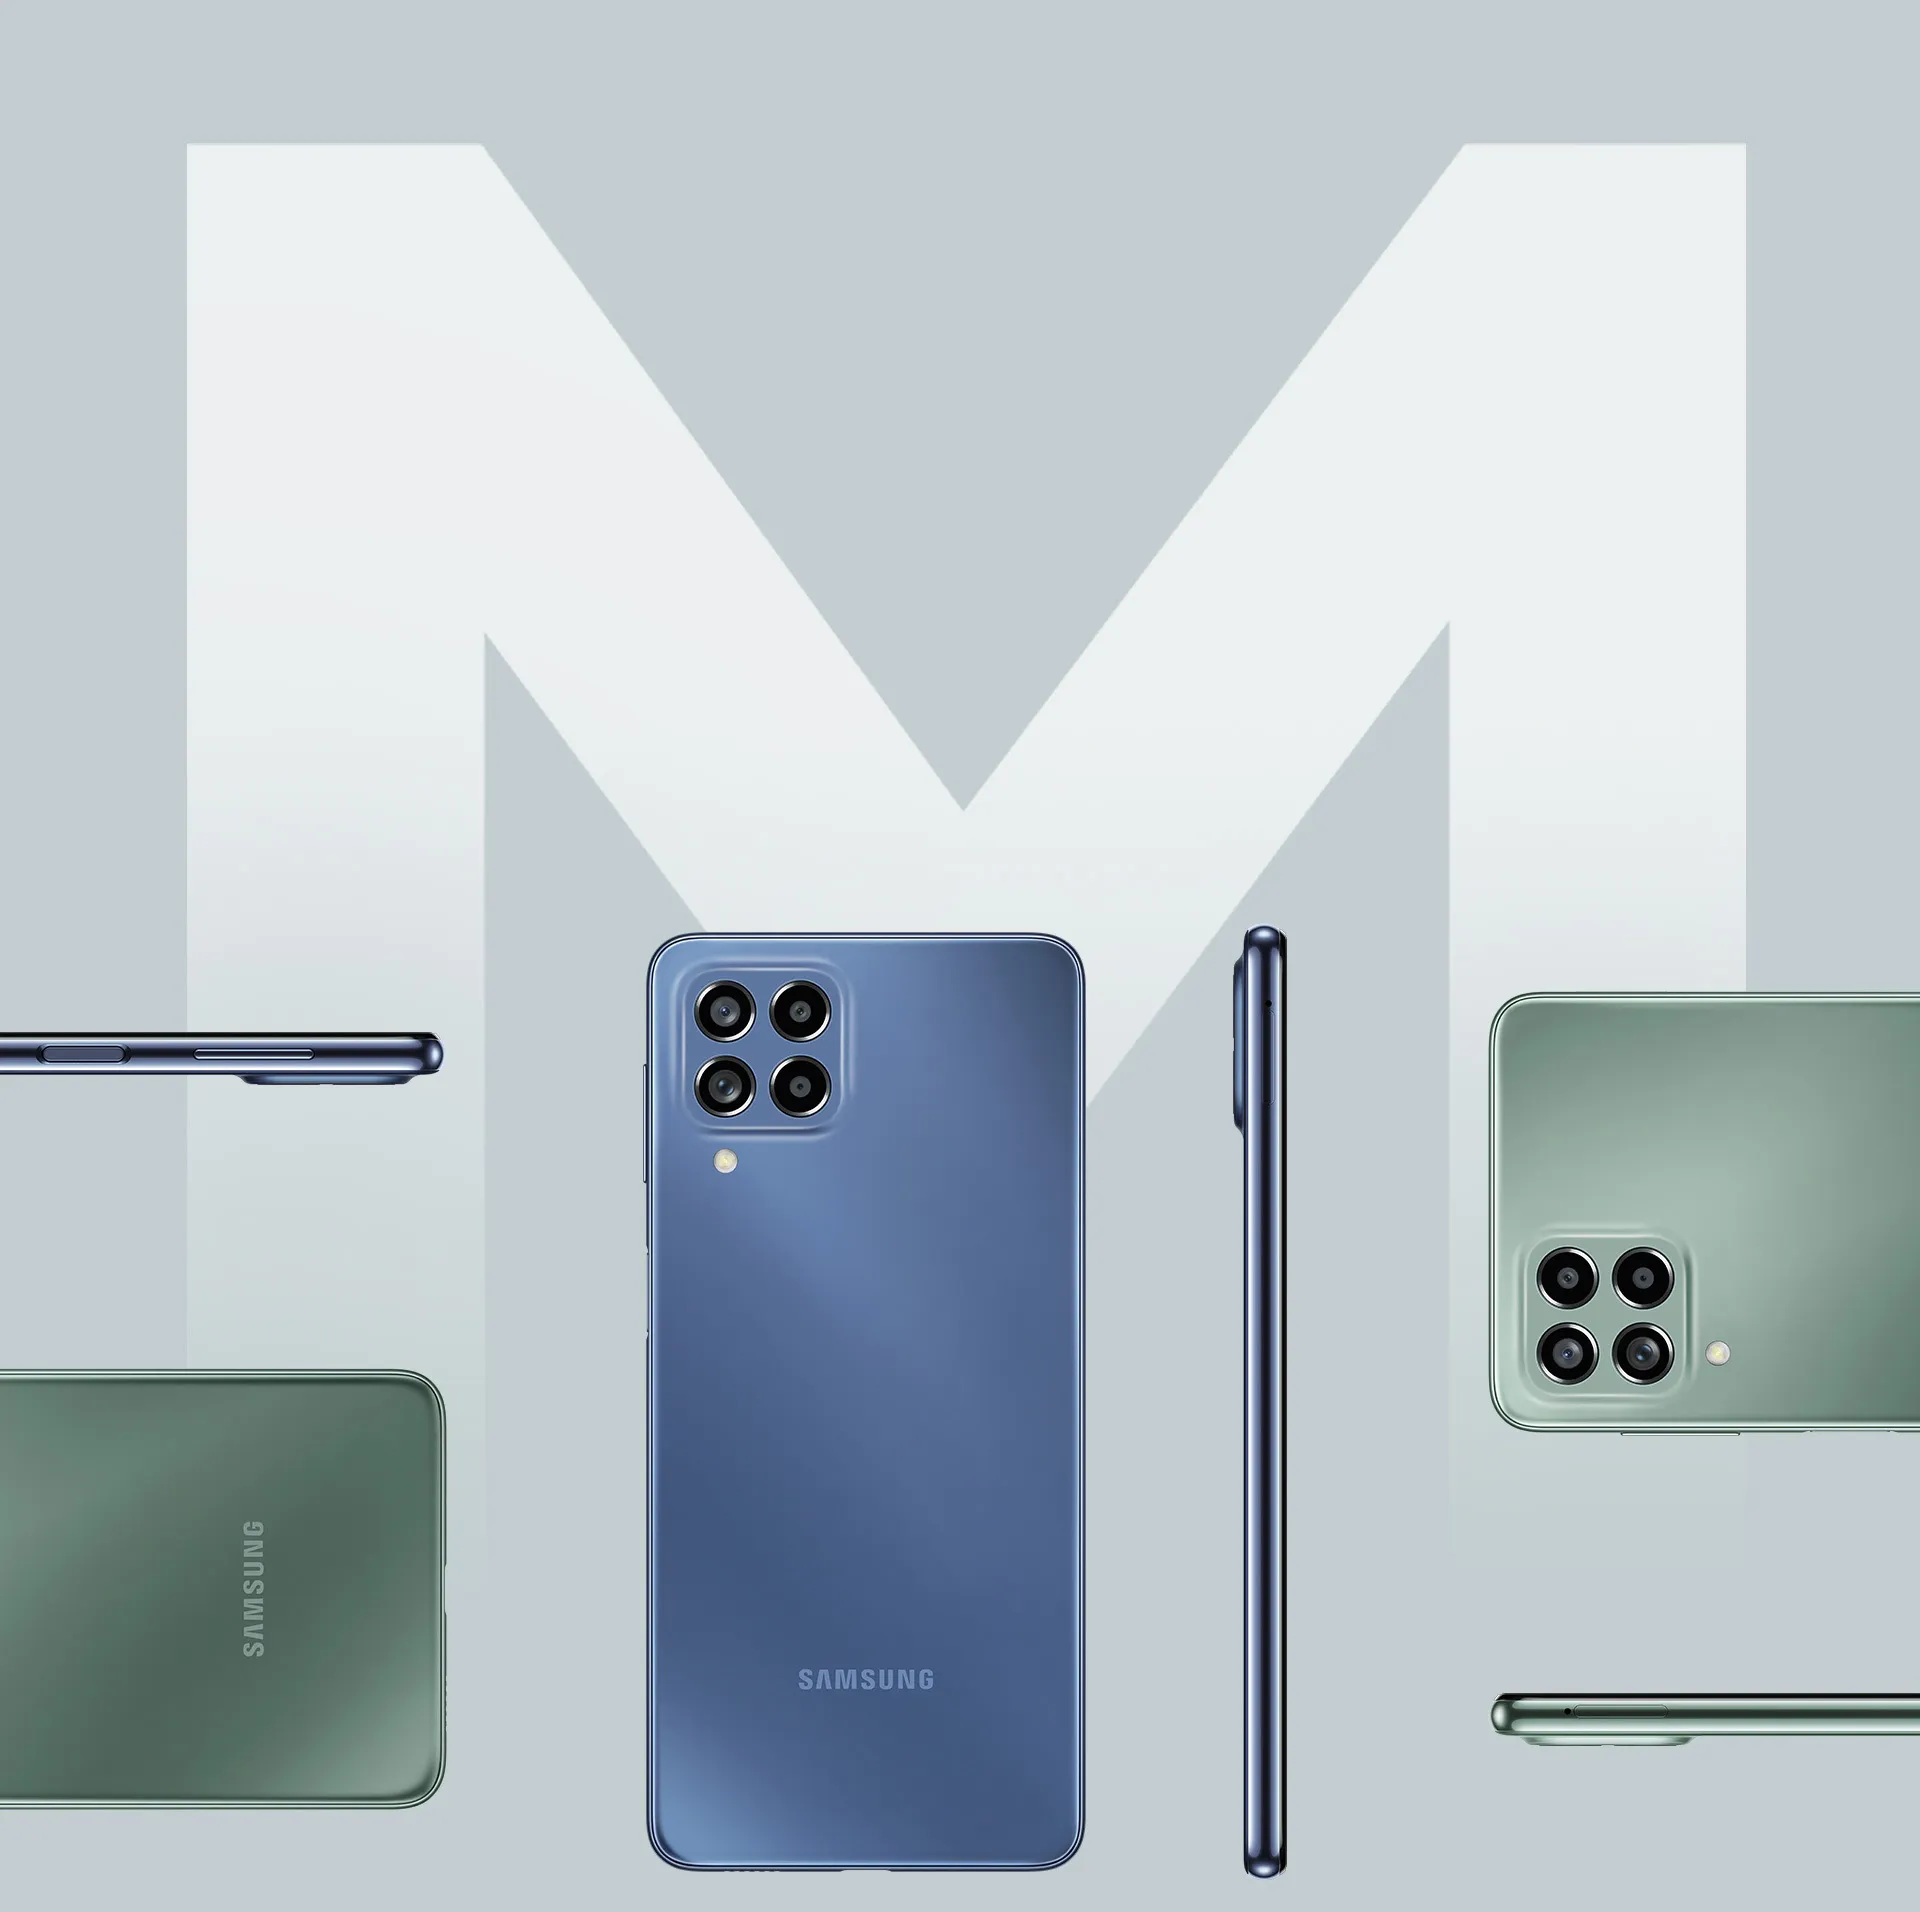 Galaxy M53 in blue and green colors